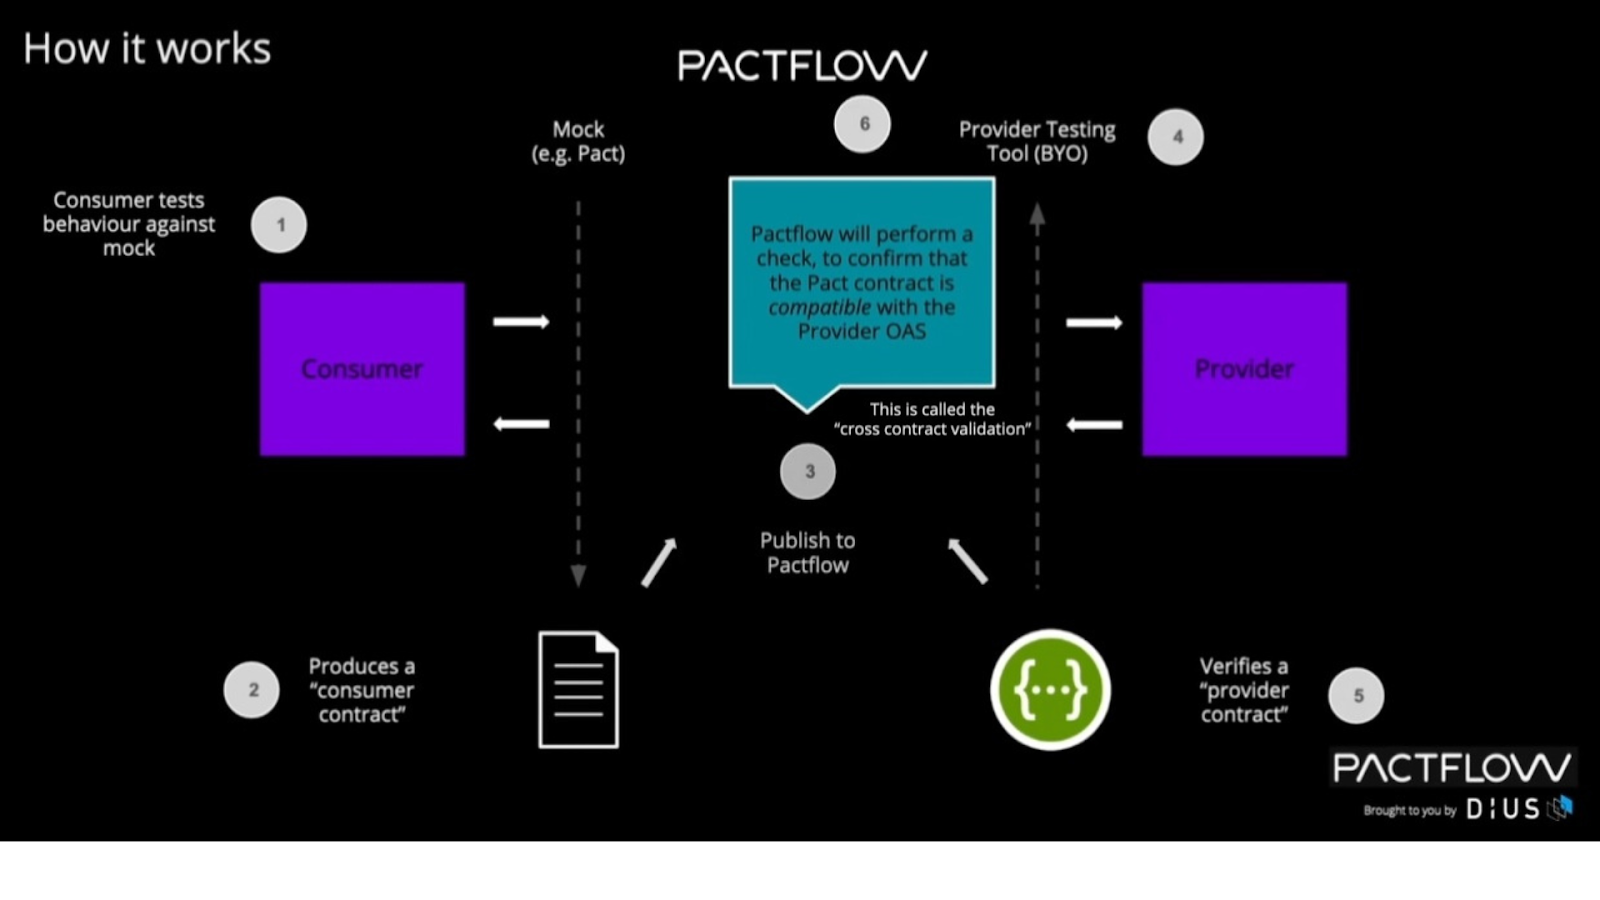 Image Sourced from docs.pactflow.io